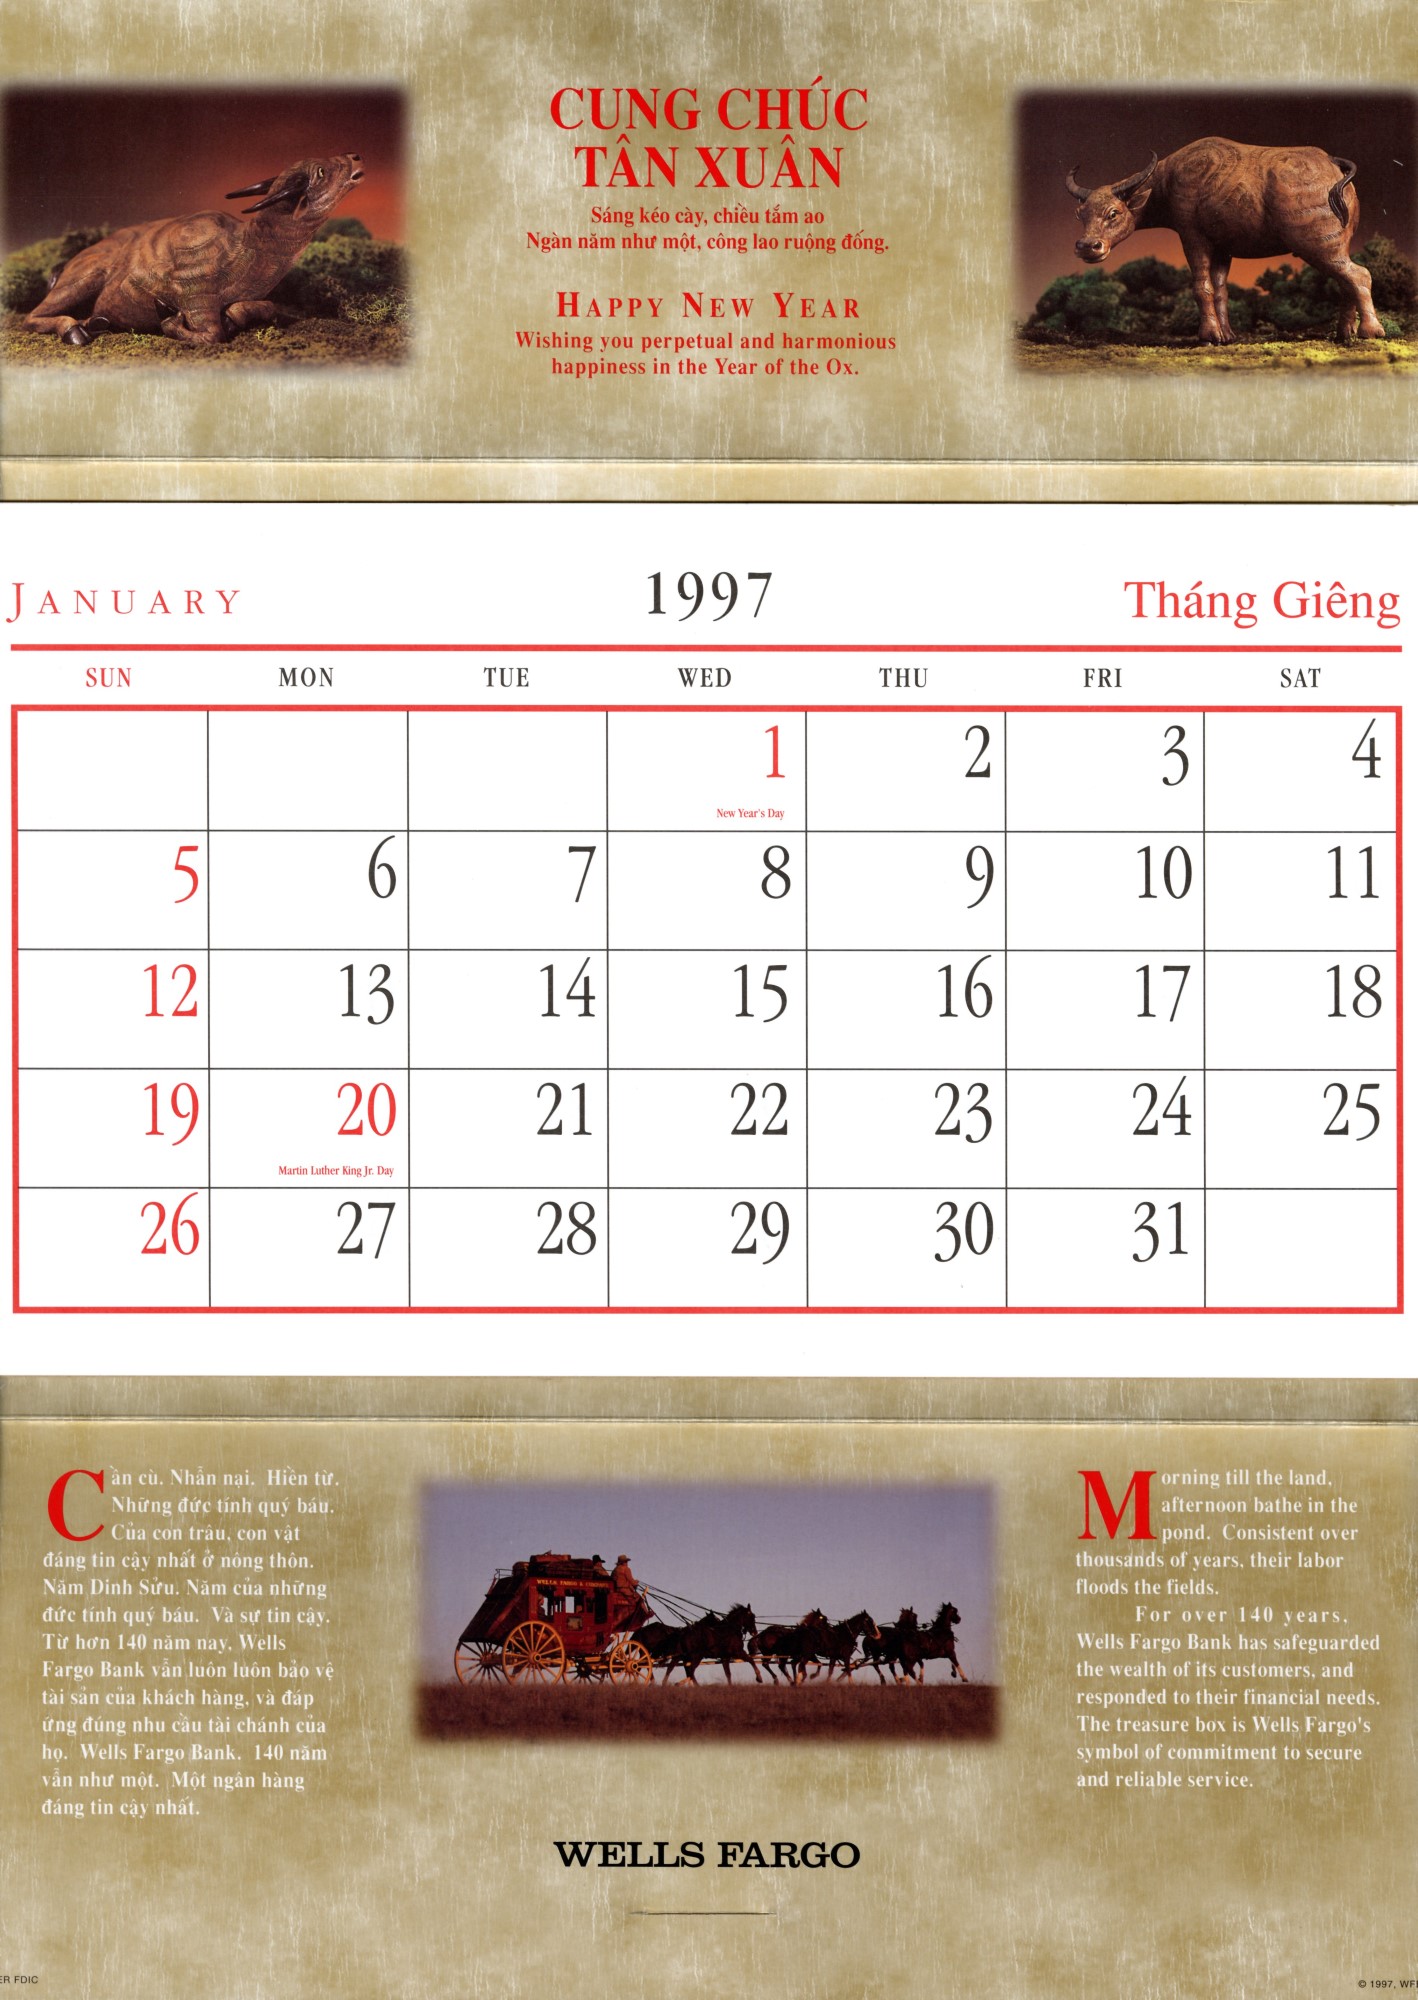 Calendar in Vietnamese: view of January 1997 page, with Wells Fargo stagecoach image on bottom.